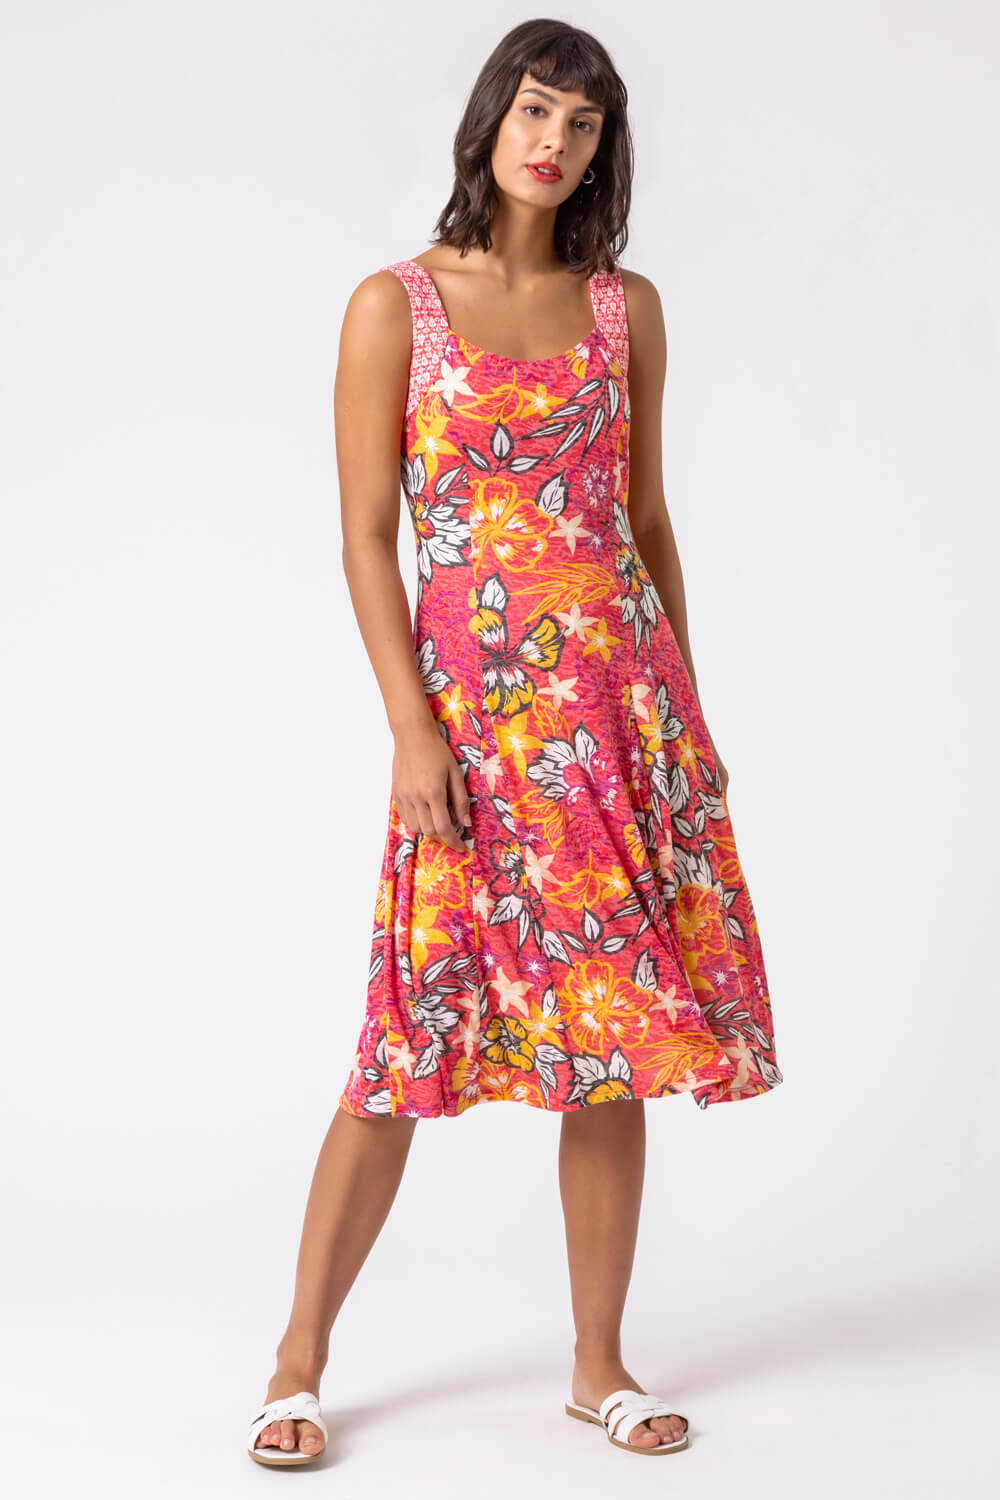 Floral Print Fit and Flare Dress in Pink - Roman Originals UK